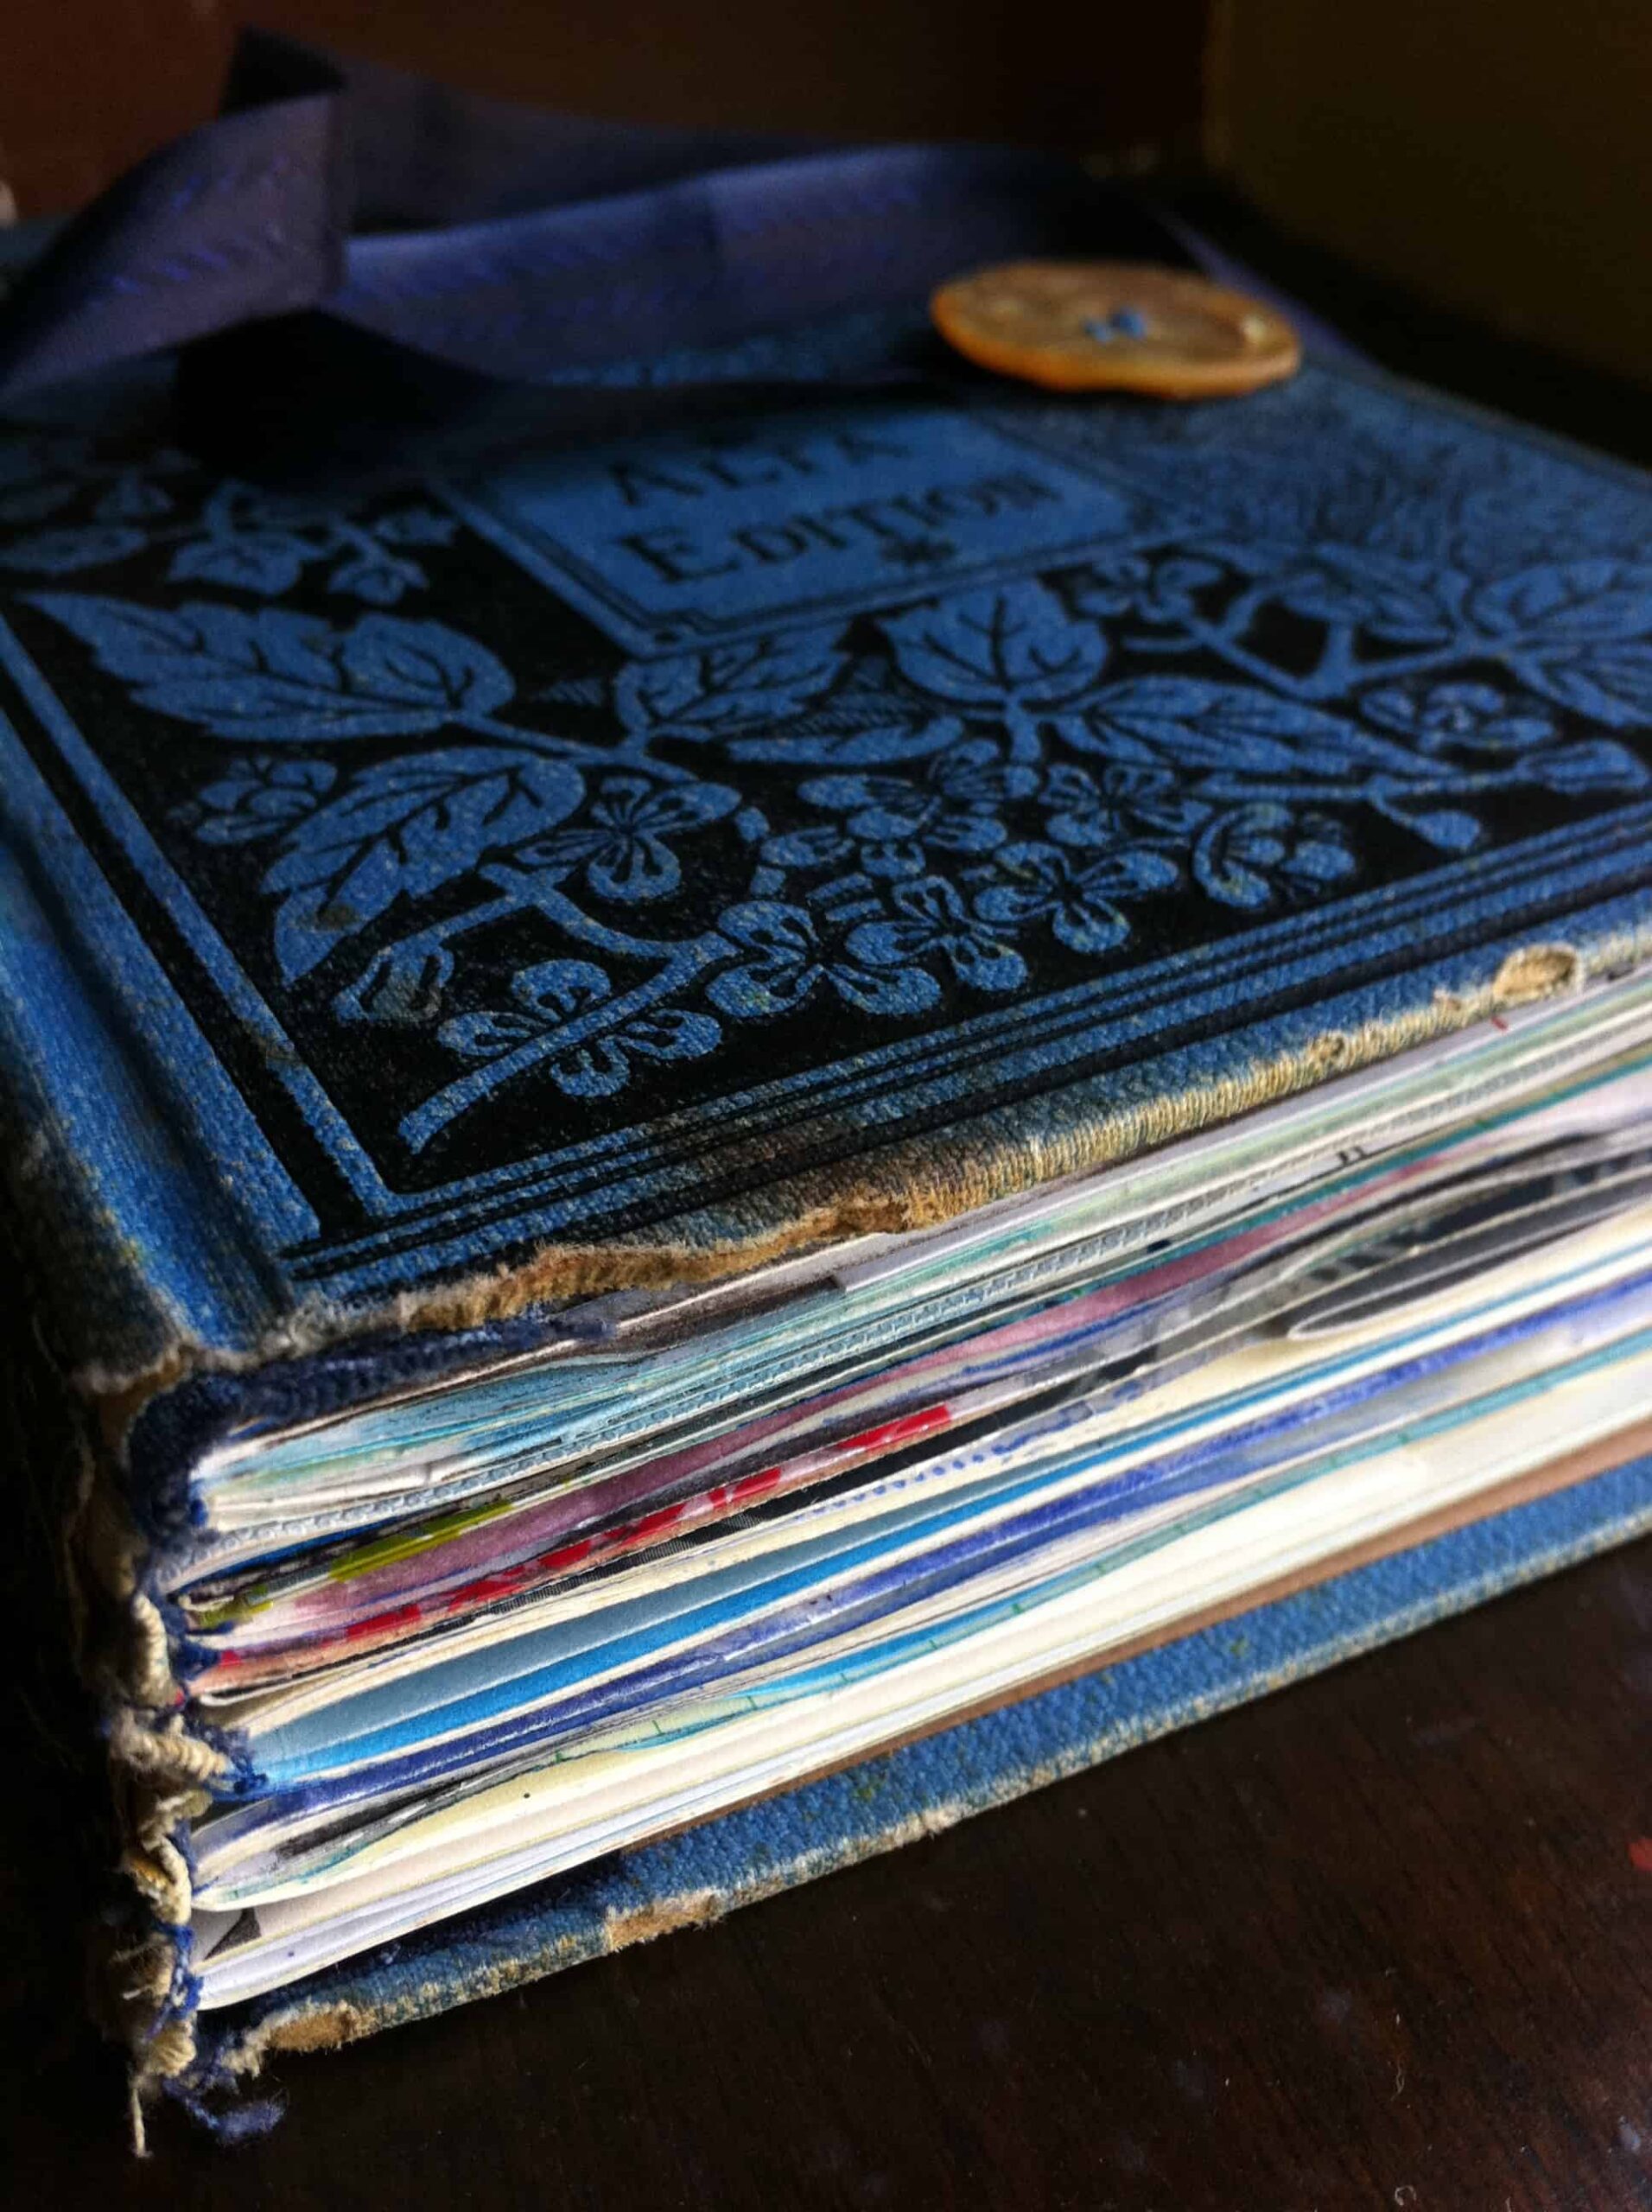 A stack of journals by Betsy Cañas Garmon with blue overtones